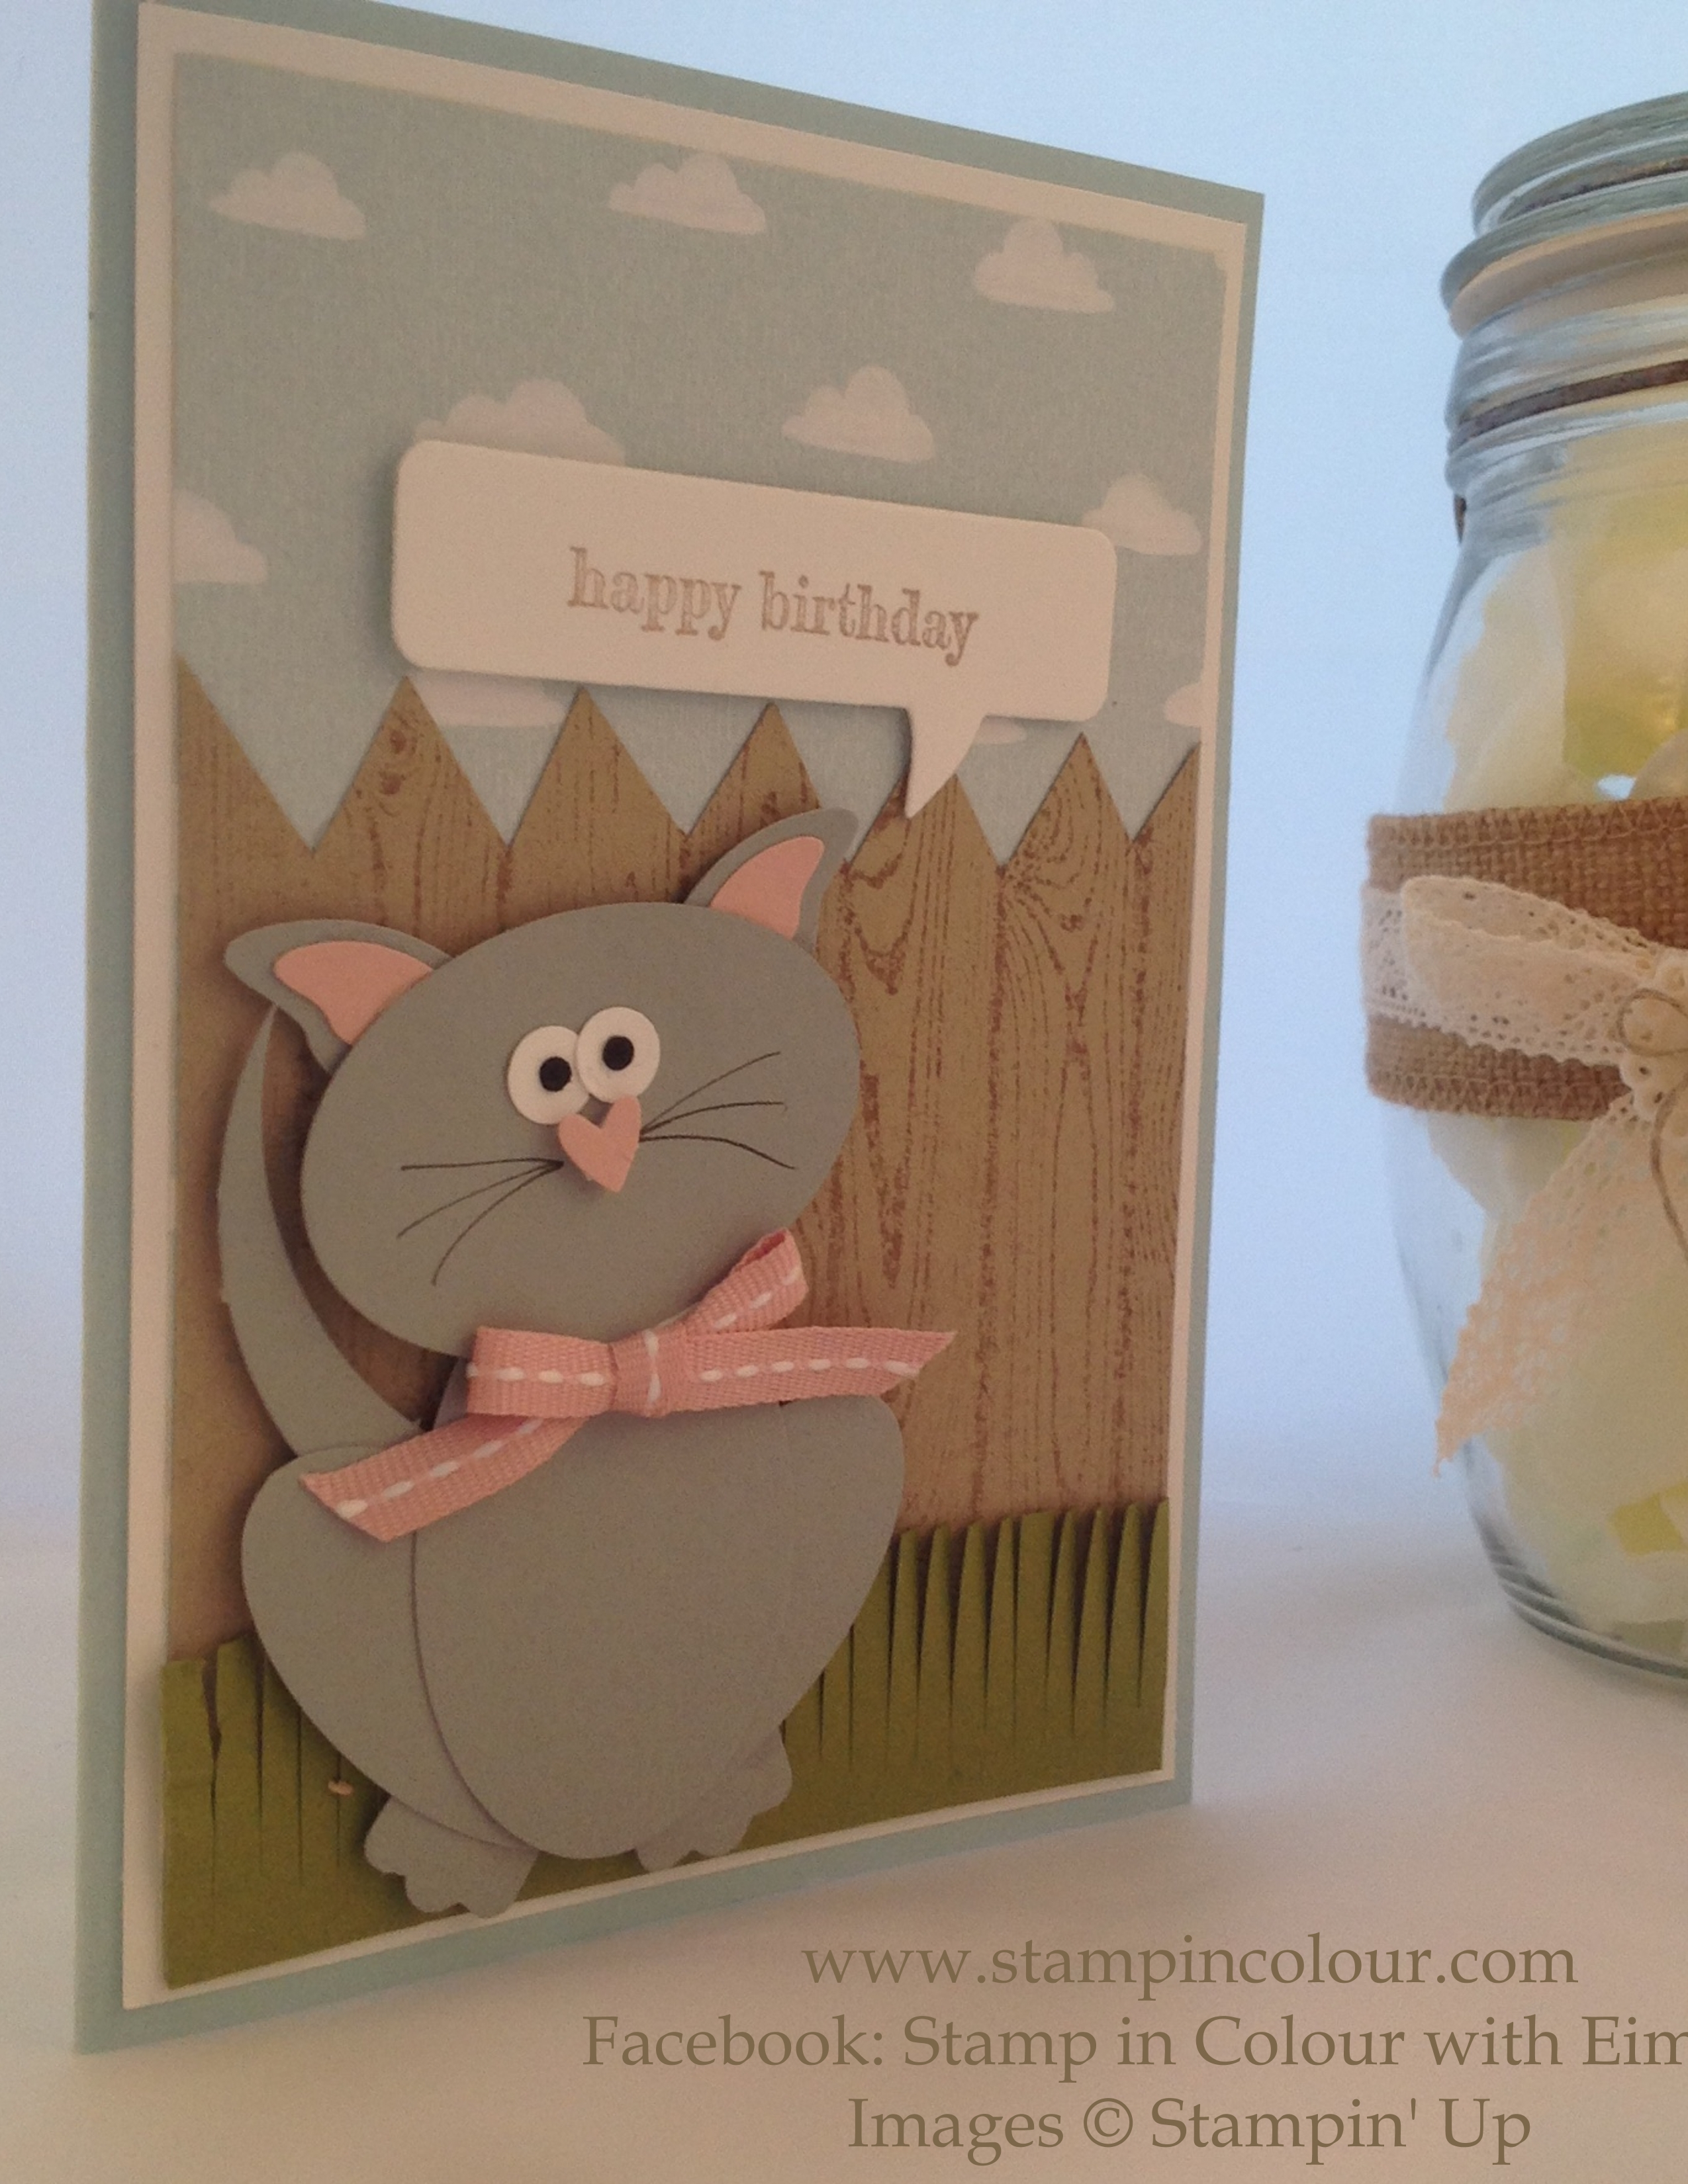 Stampin Up Boy Birthday Card Ideas Stampin Up Punch Art For Childrens Birthday Cards